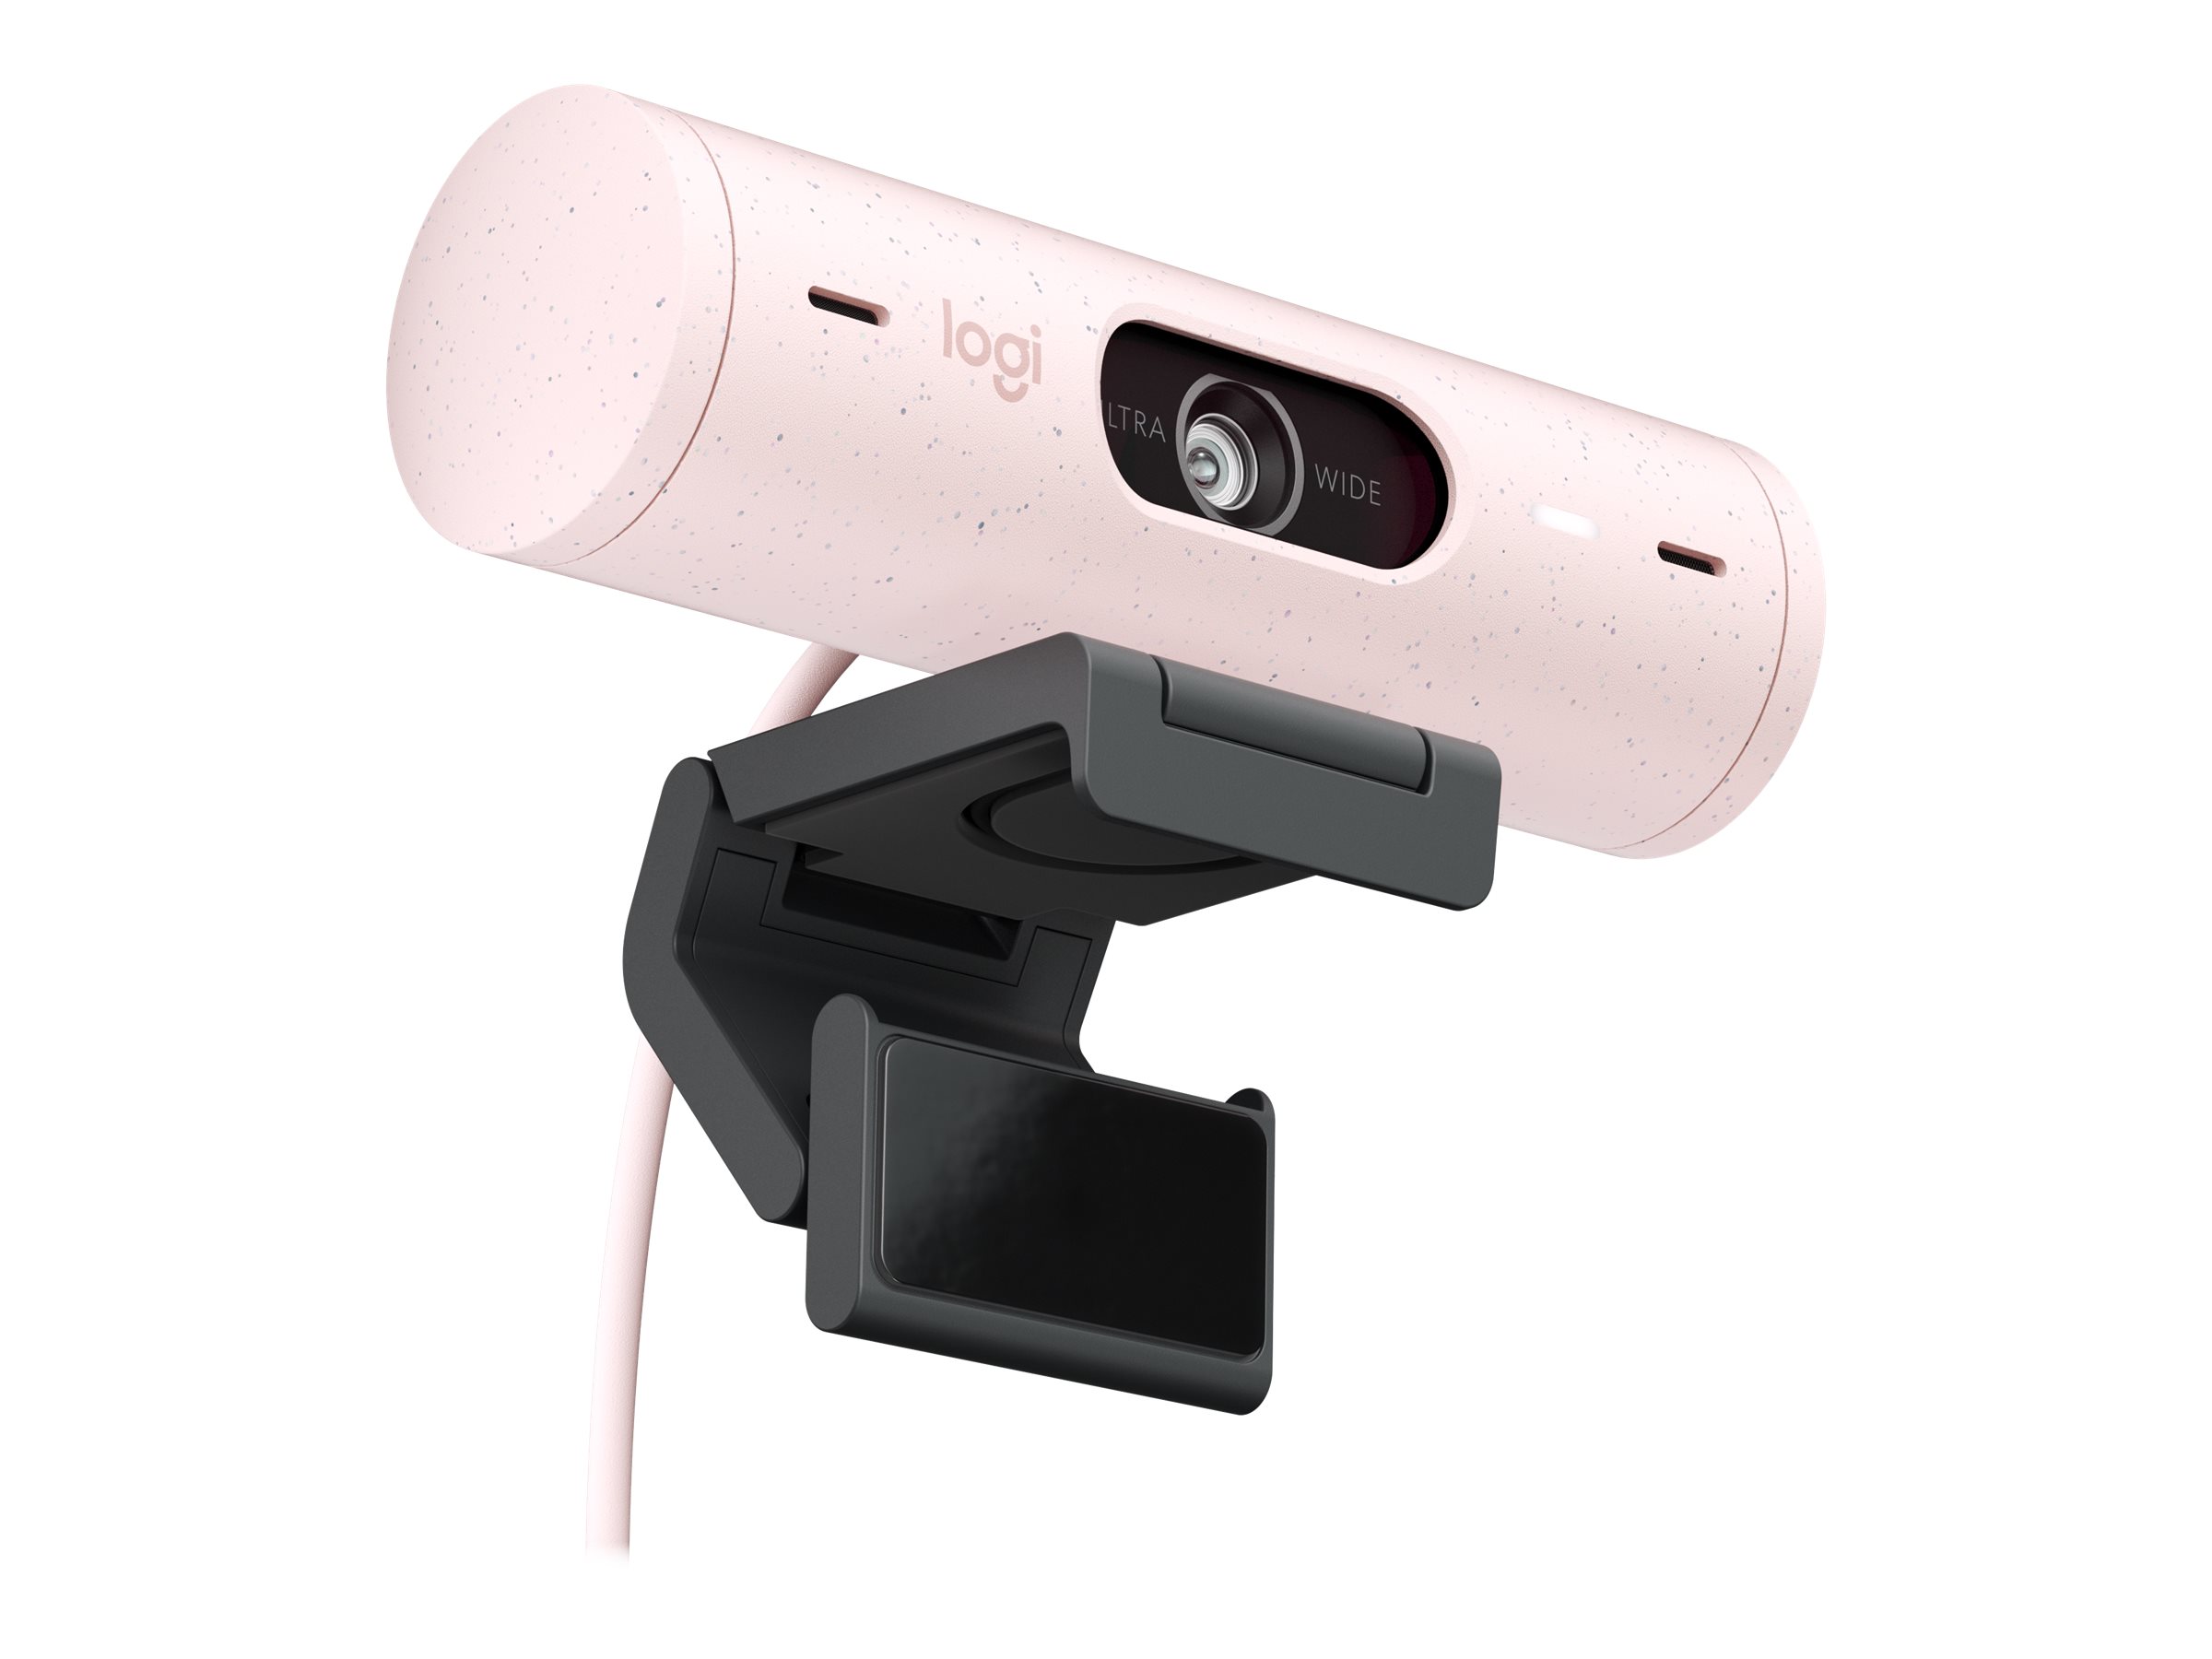 Oproepen Verslaggever volgorde Logitech Brio 500 Full HD Webcam with Auto Light Correction, Auto-Framing,  Show Mode, Dual Noise Reduction Mics, Webcam Privacy Cover, Works with  Microsoft Teams, Google Meet, Zoom | www.shi.com